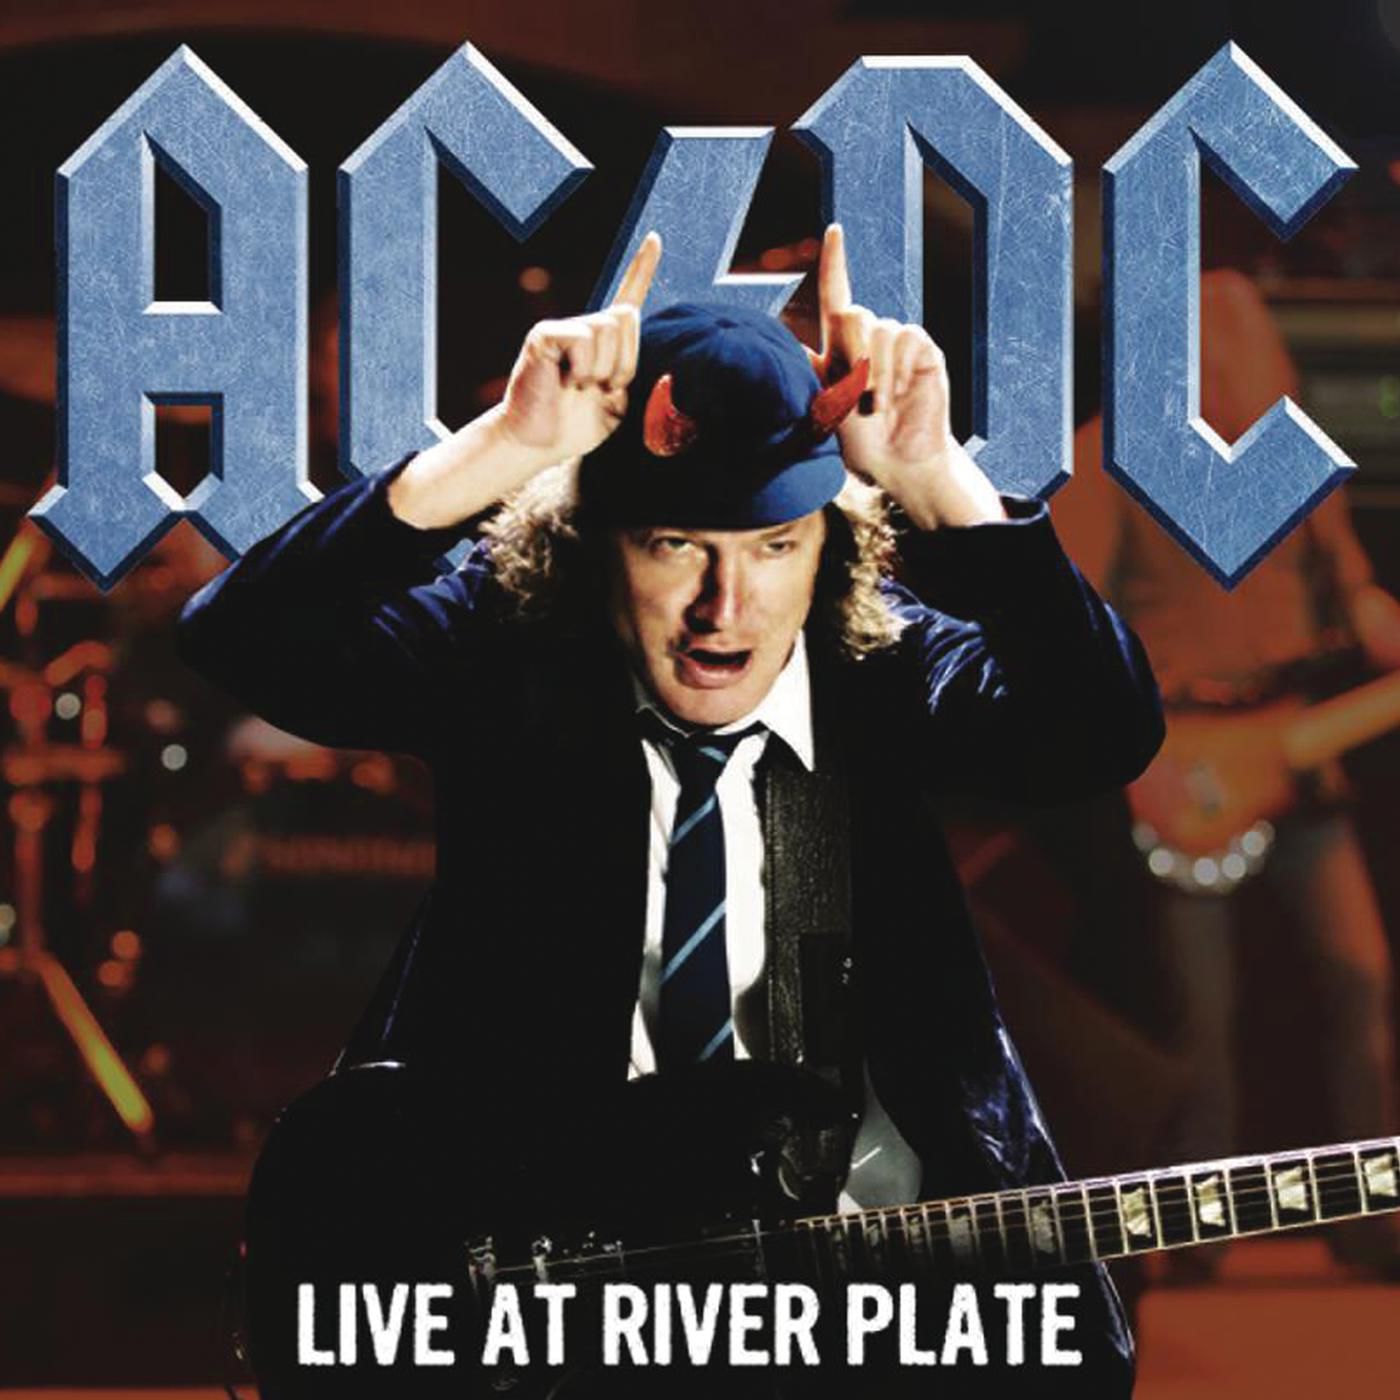 AC/DC – Live at River Plate (Remastered) (2012/2020) [FLAC 24bit/96kHz]